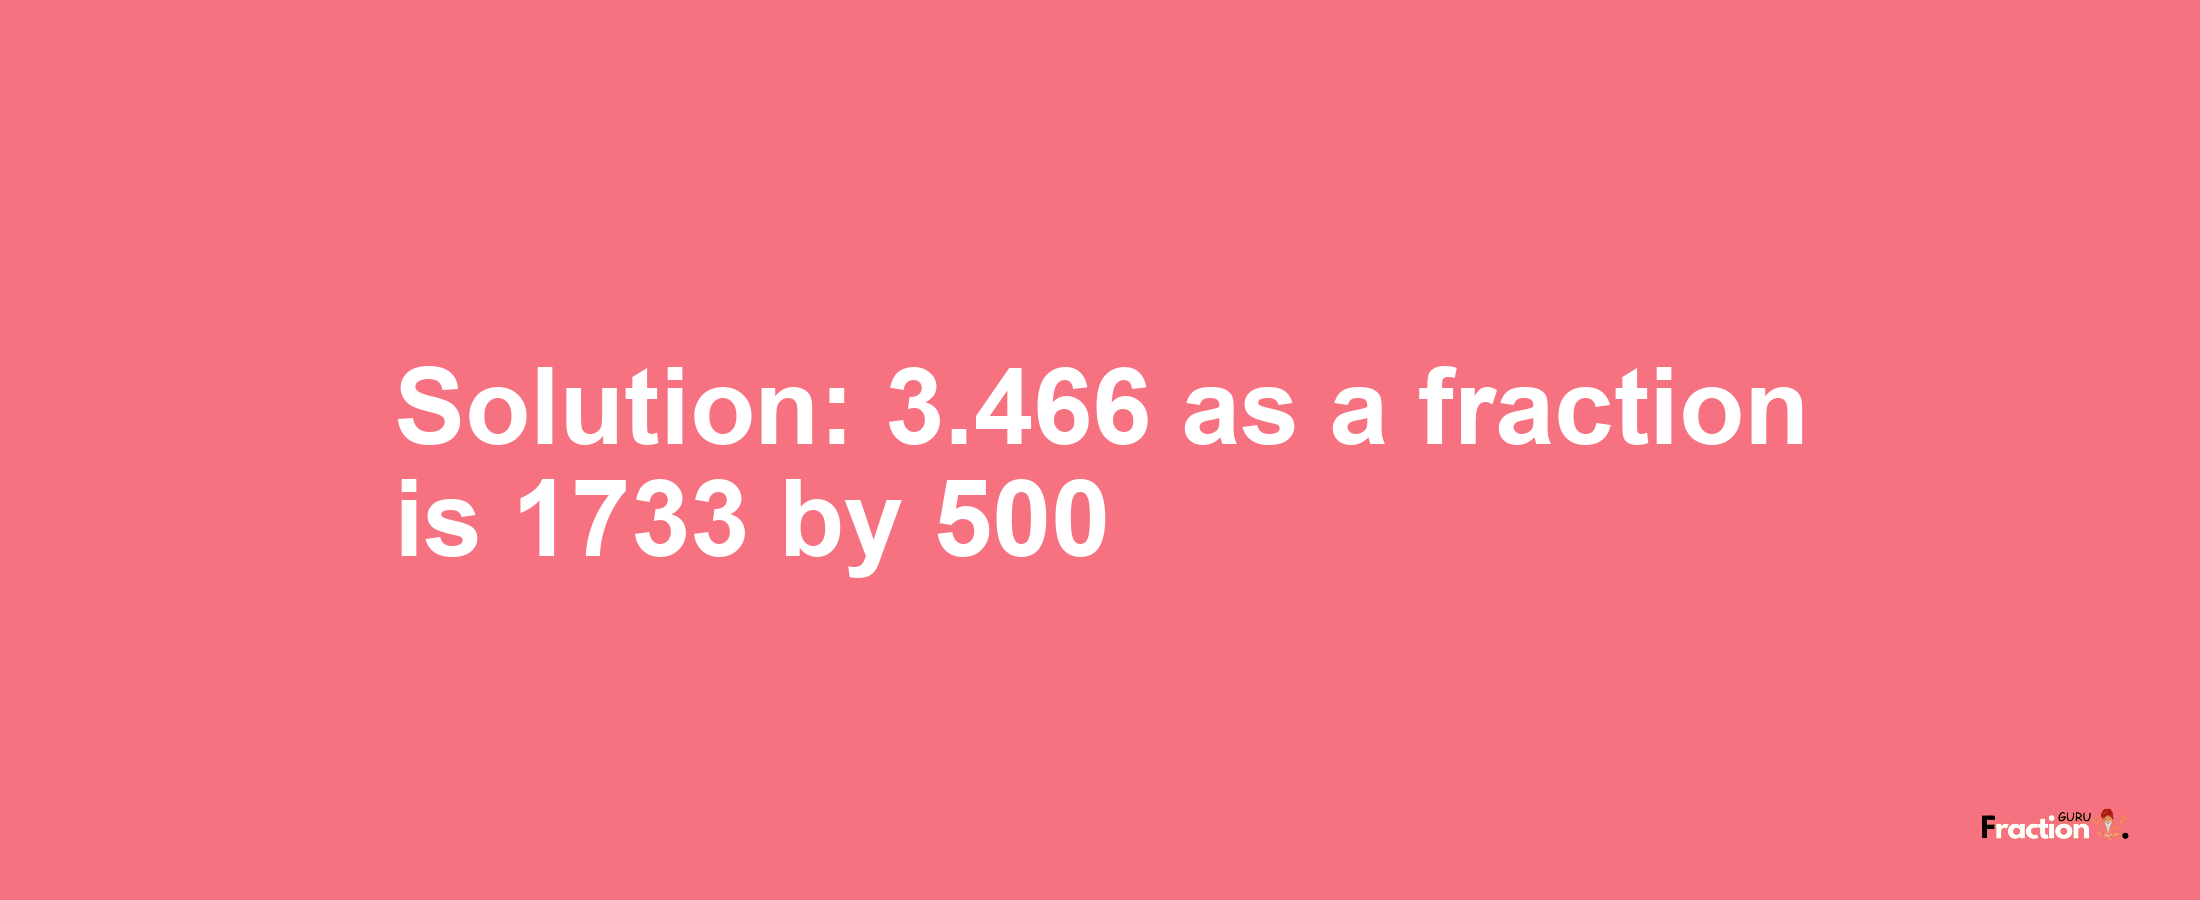 Solution:3.466 as a fraction is 1733/500